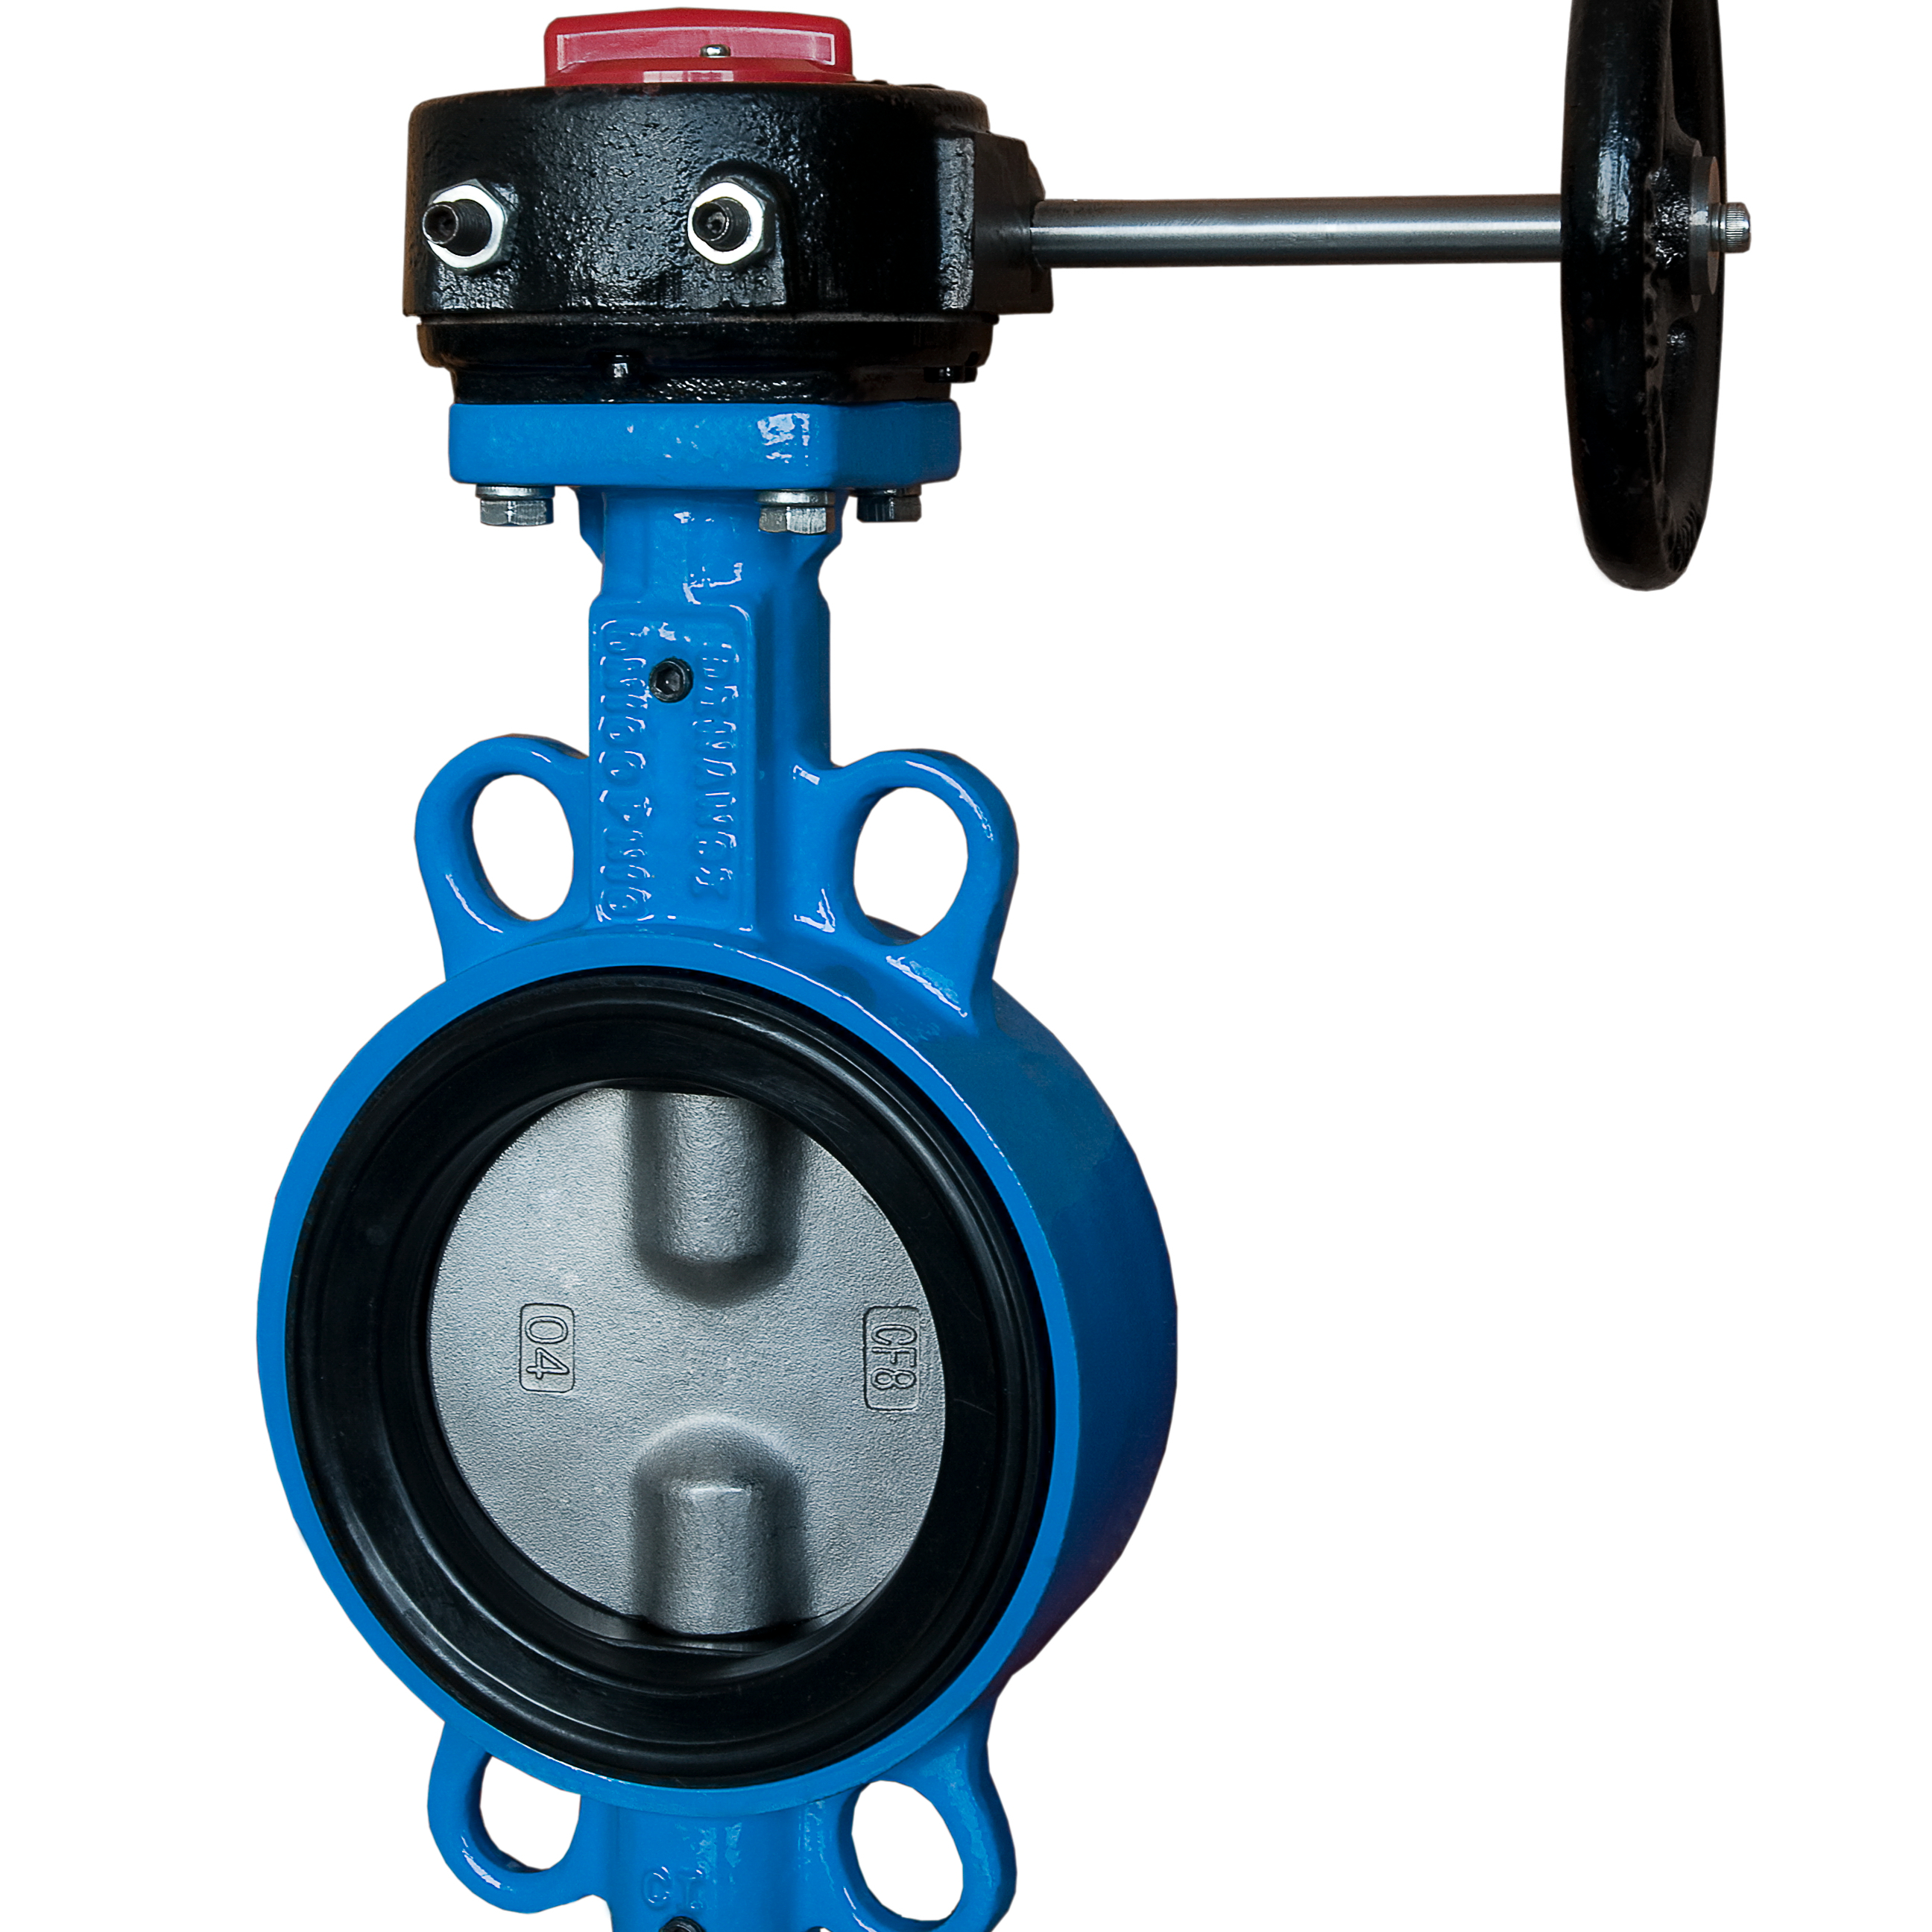 Butterfly Valve Uri ng Wafer Ductile Iron Worm Gearbox EPDM Seat Ductile Cast Iron DI CI PN10 PN16 Valve